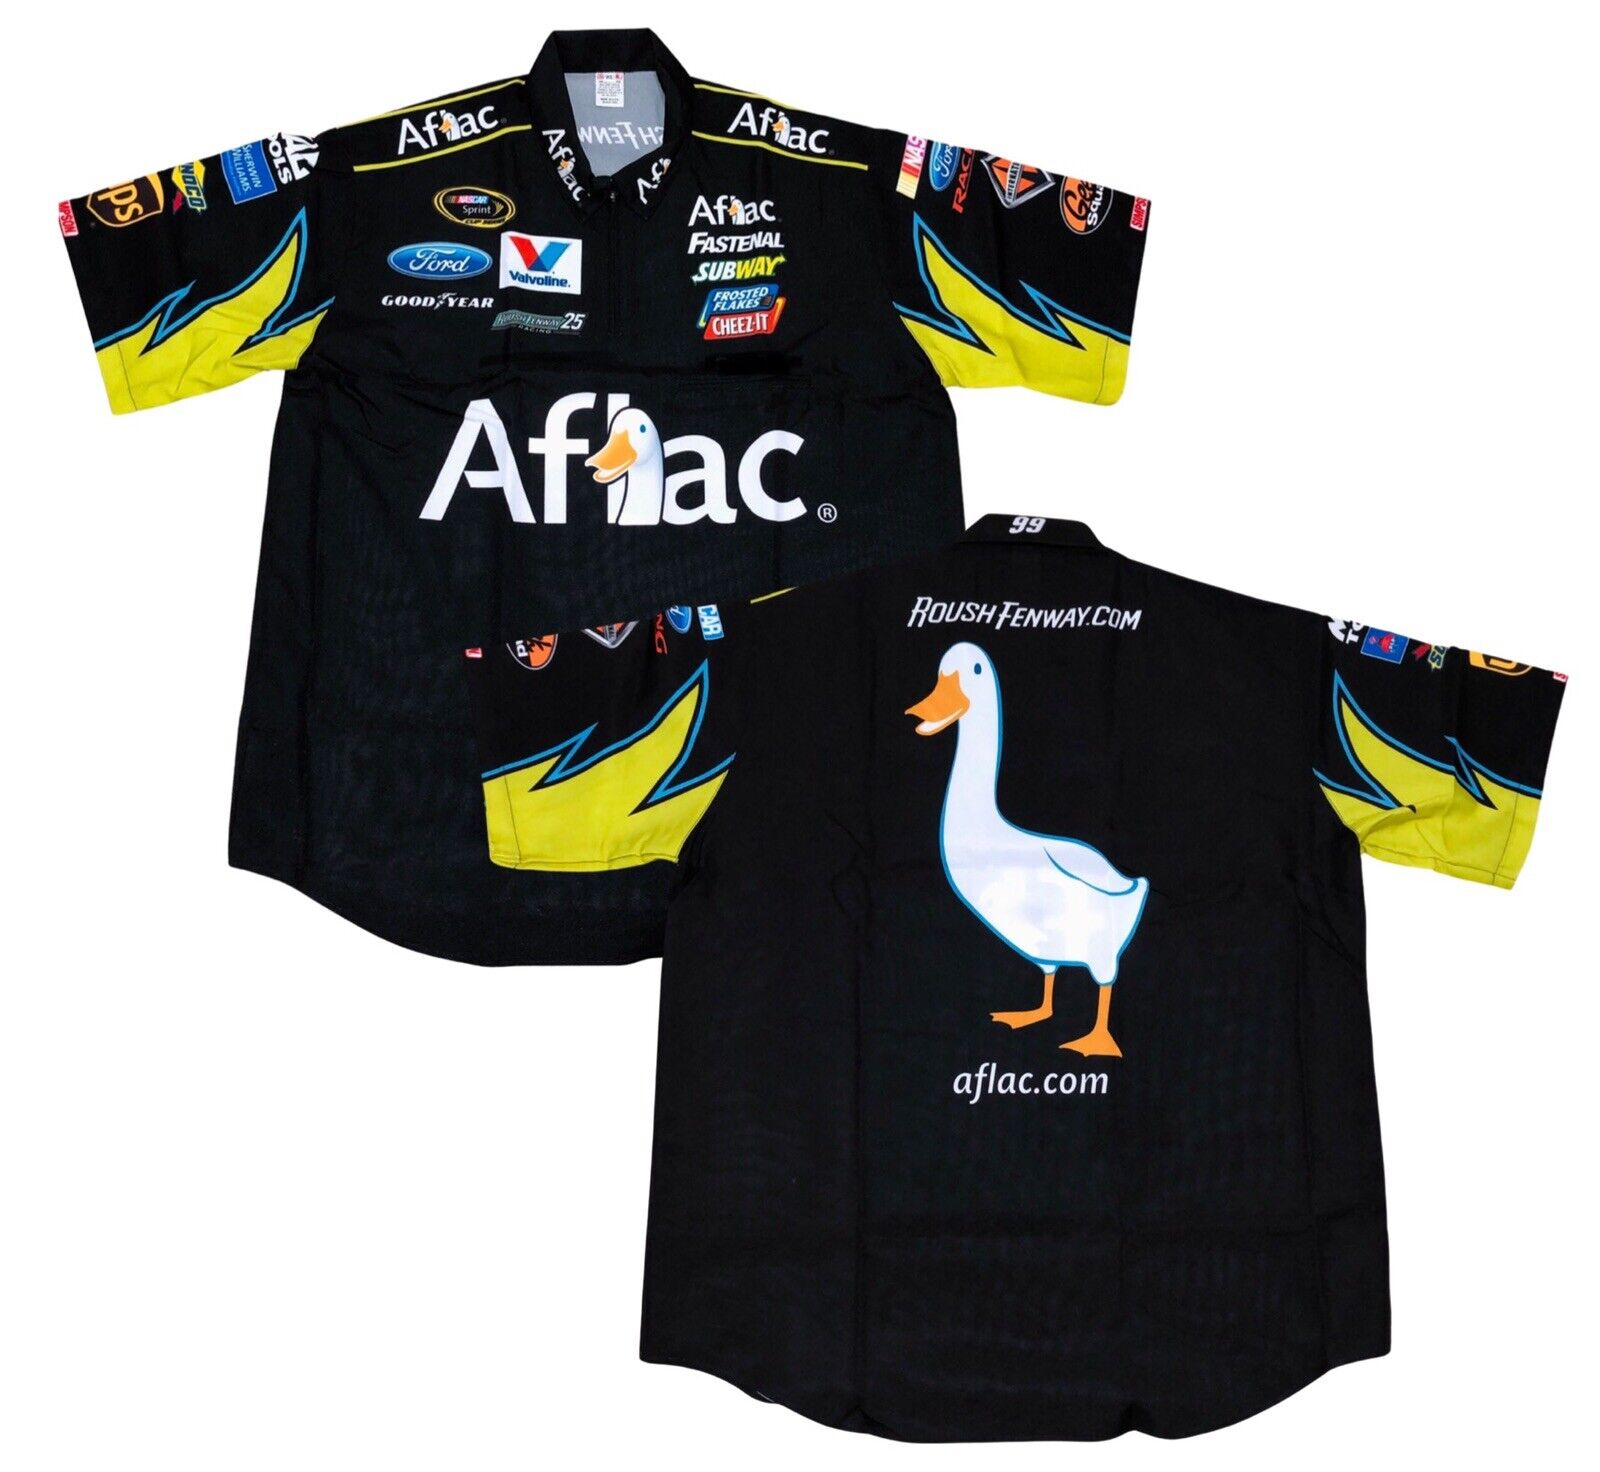 XL New NASCAR Pit Crew Shirt Carl Edwards Roush-Fenway Ford AFLAC #99 Duck Wings